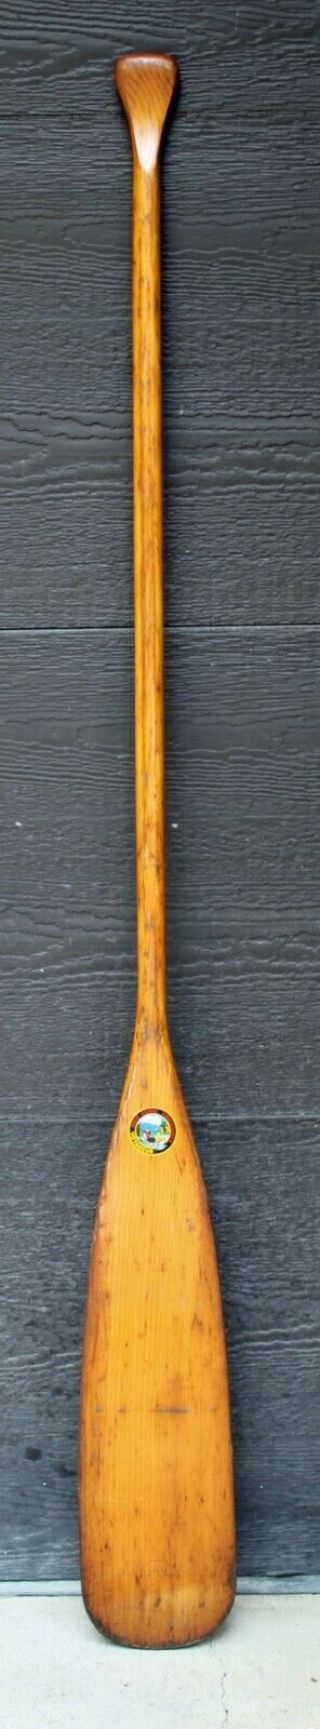 Antique Canoe Paddle 65 Inches Long All Wood With Great Patina Marker Marked